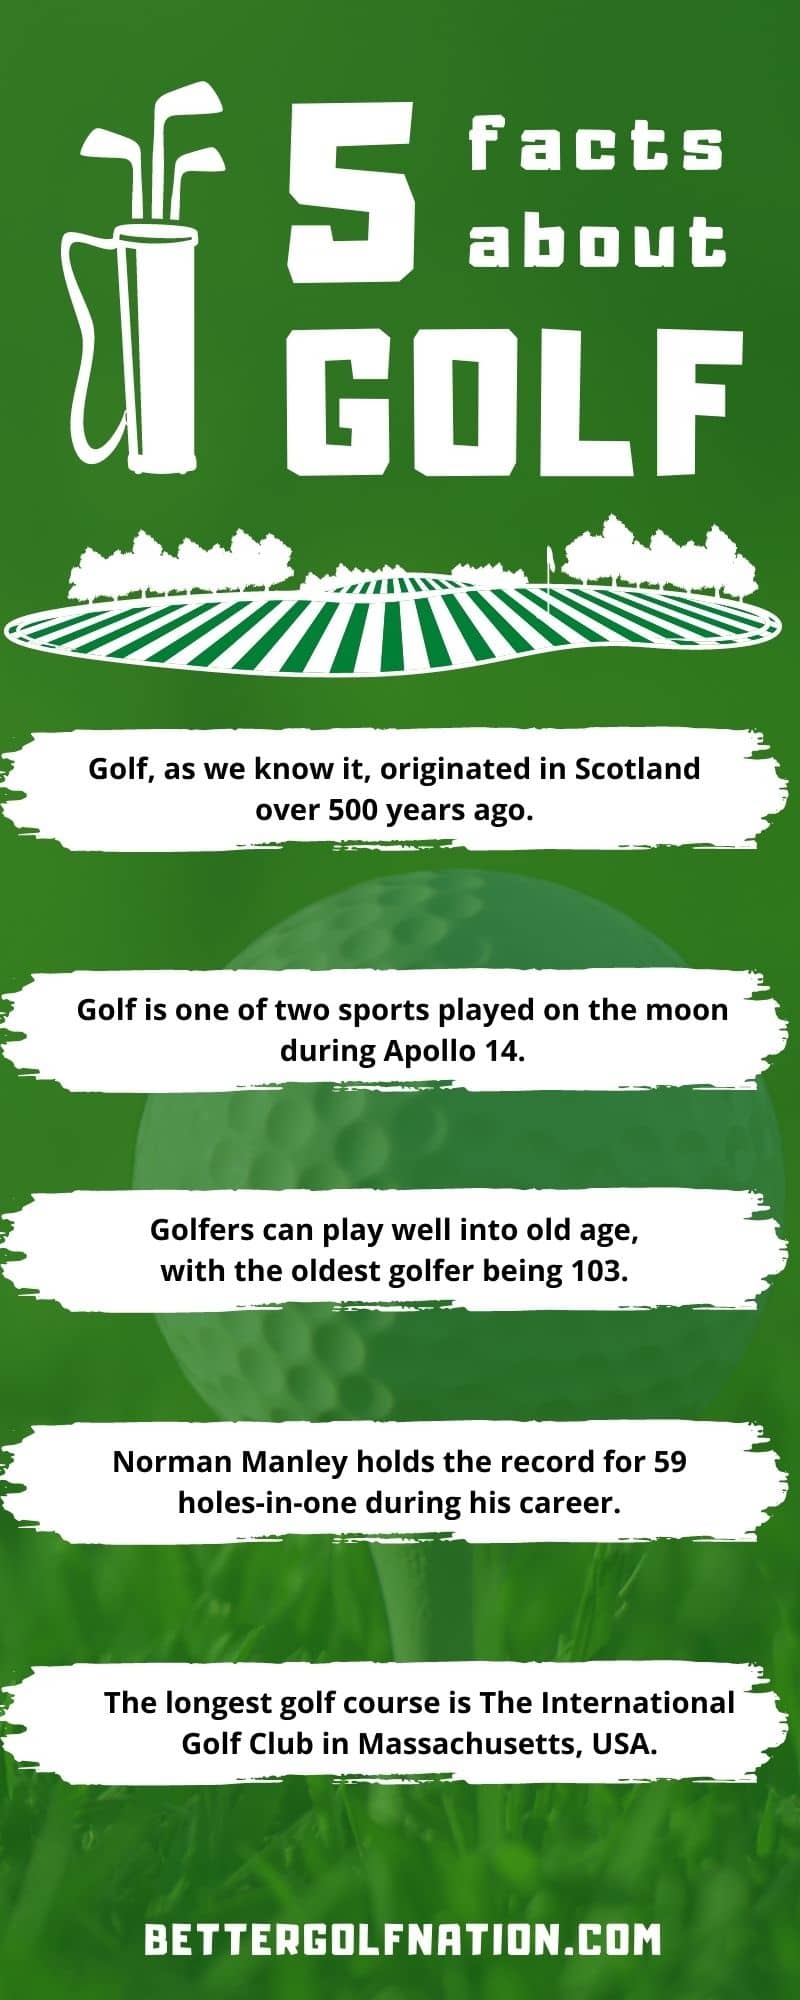 Better Golf nation Facts Infographic